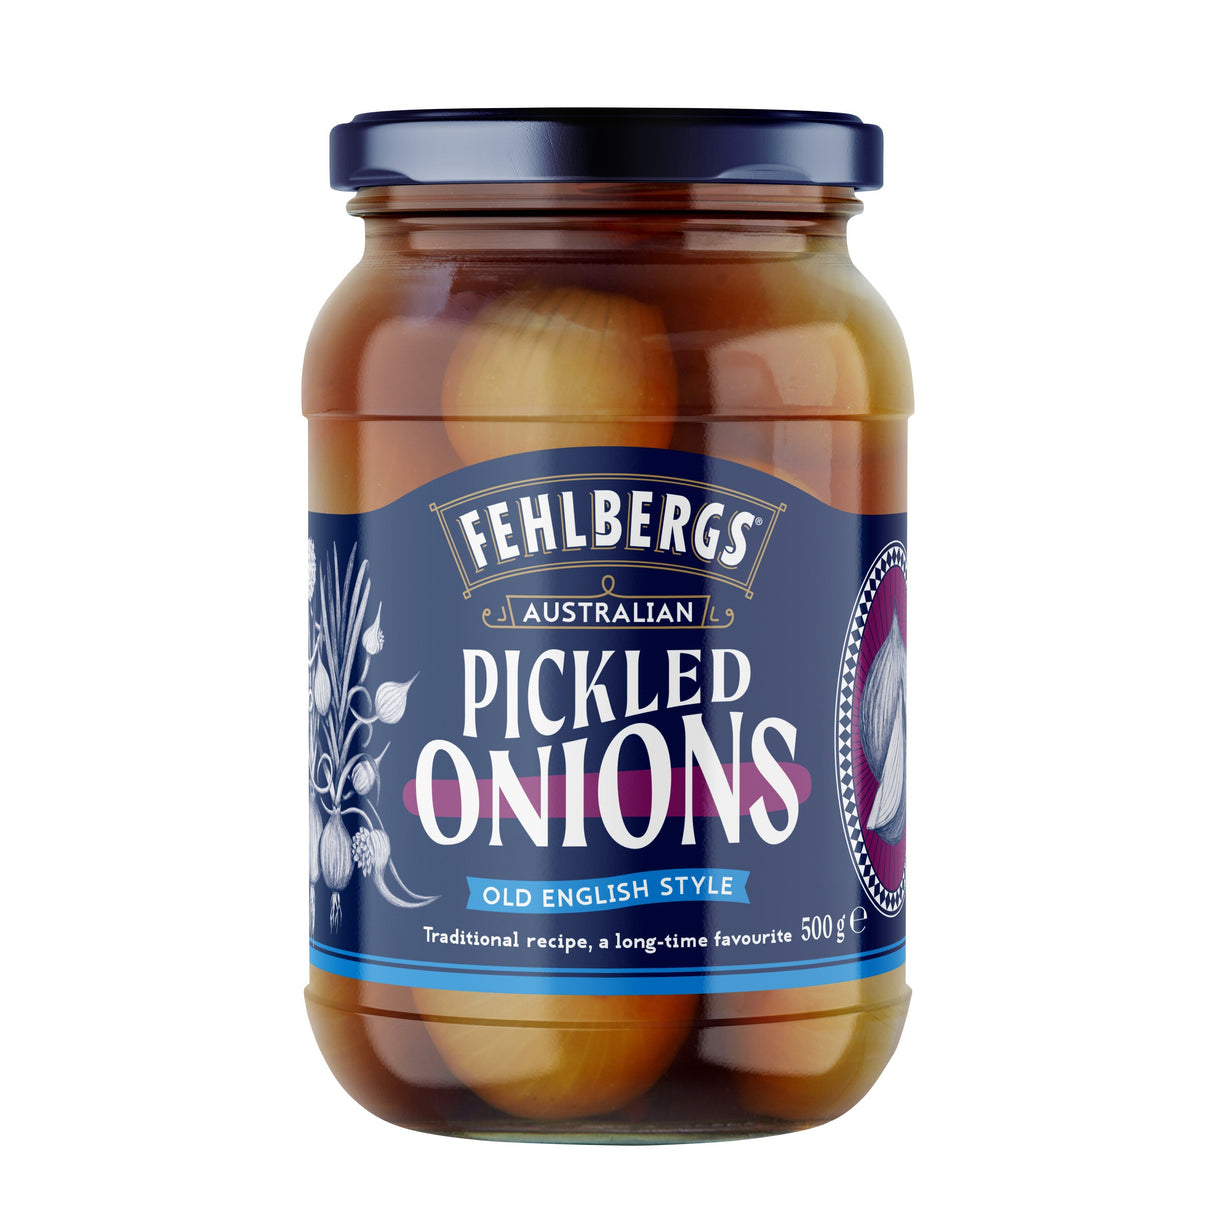 Fehlbergs Pickled Onions 500g